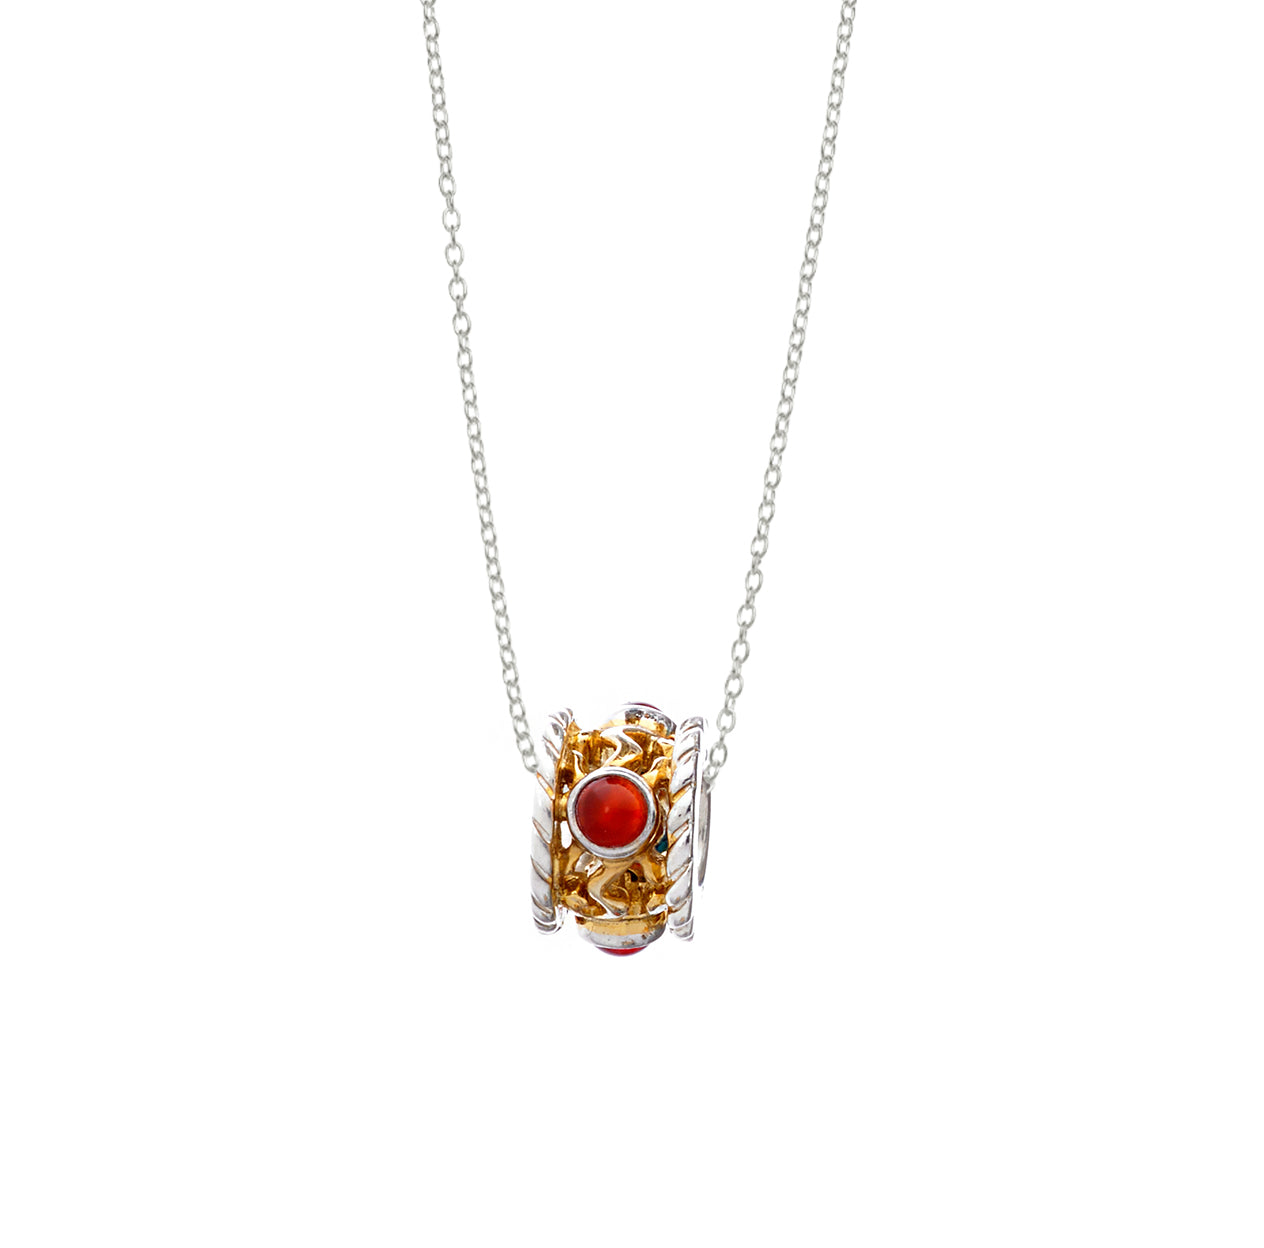 July Carnelian Sterling Silver with 14k Gold Vermeil Bead Necklace